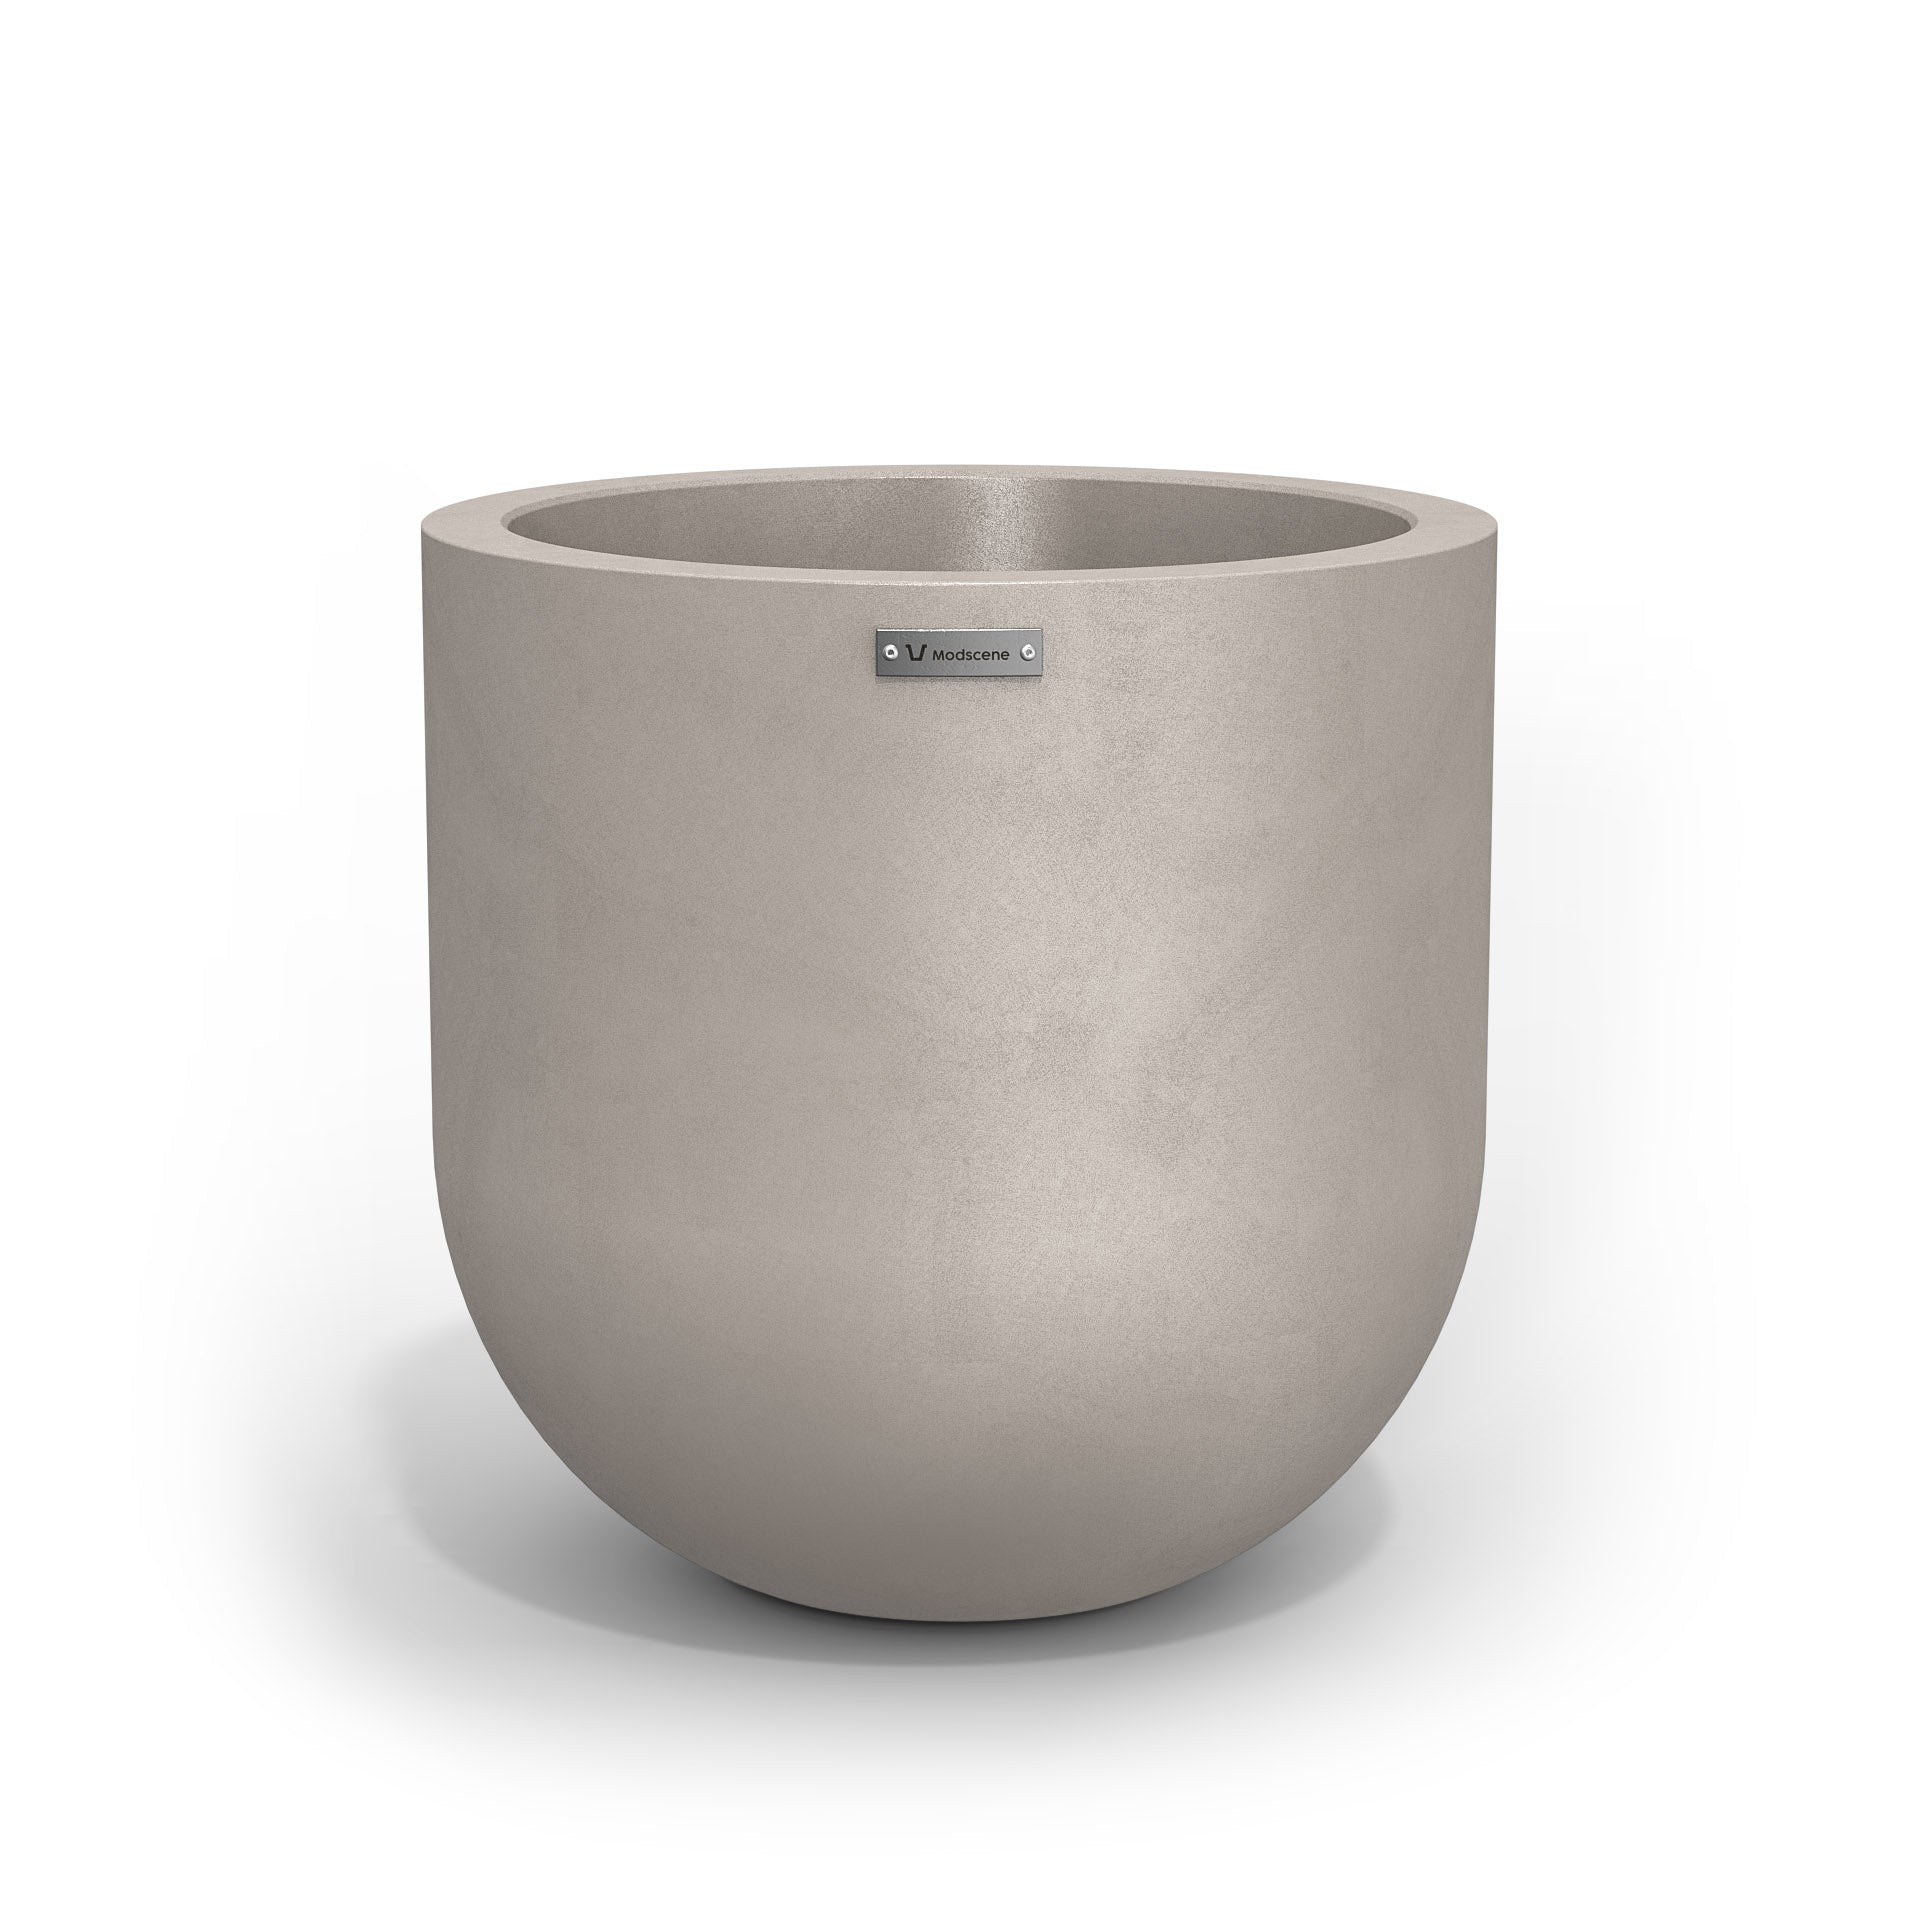 A medium sized planter pot in a sandstone colour with a concrete look finish.